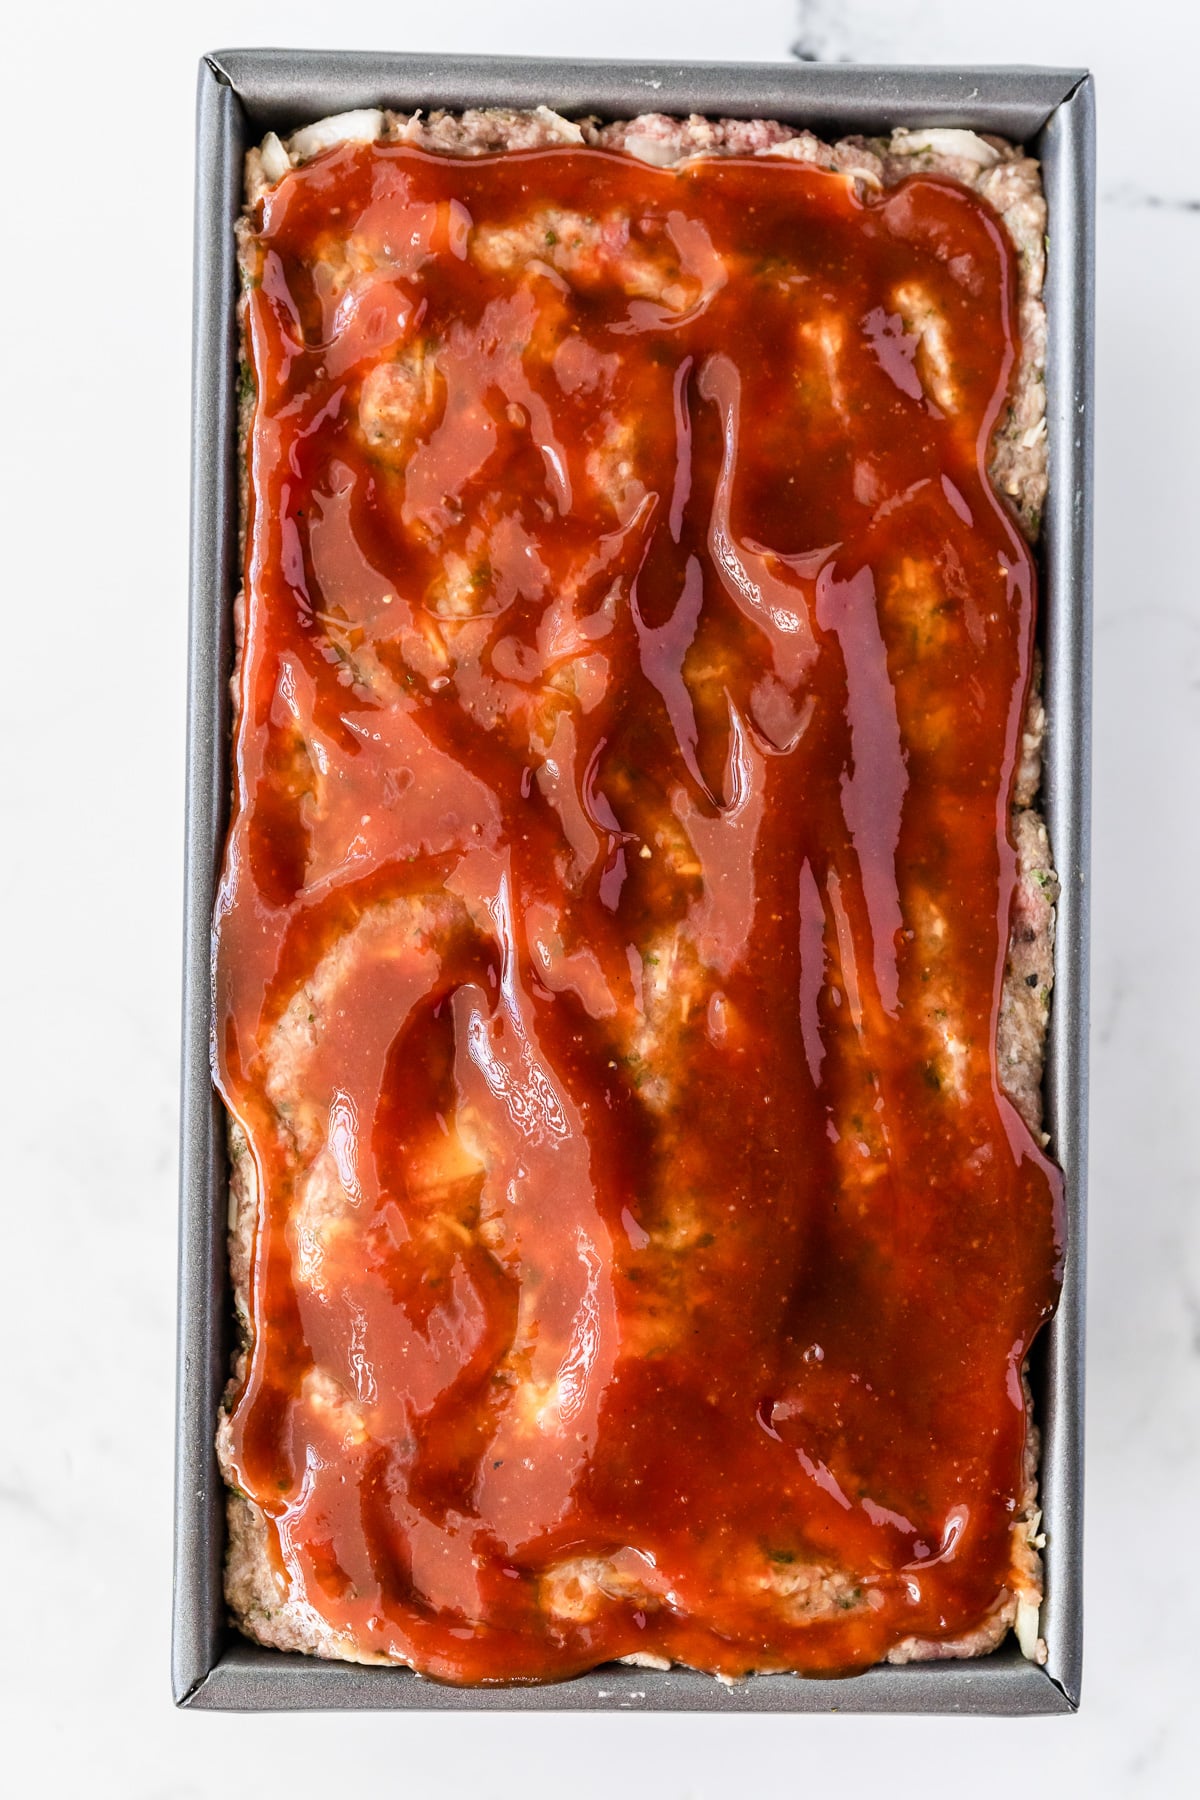 A raw meatloaf in a metal pan with a red sauce on top.